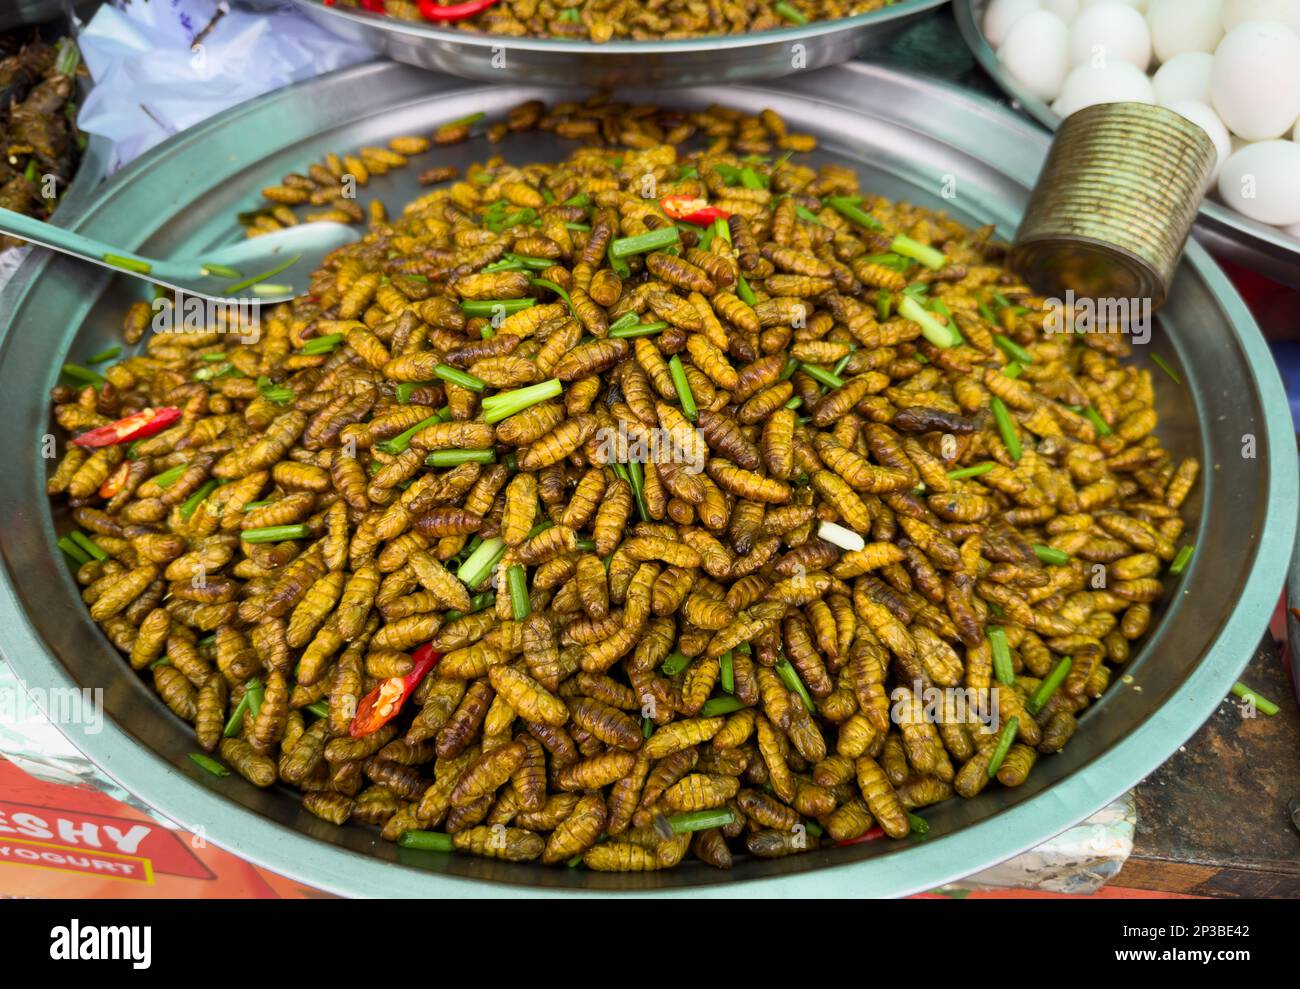 Sauteed silkworm larvae on sale at Skun Insect Market in Cambodia. Stock Photo